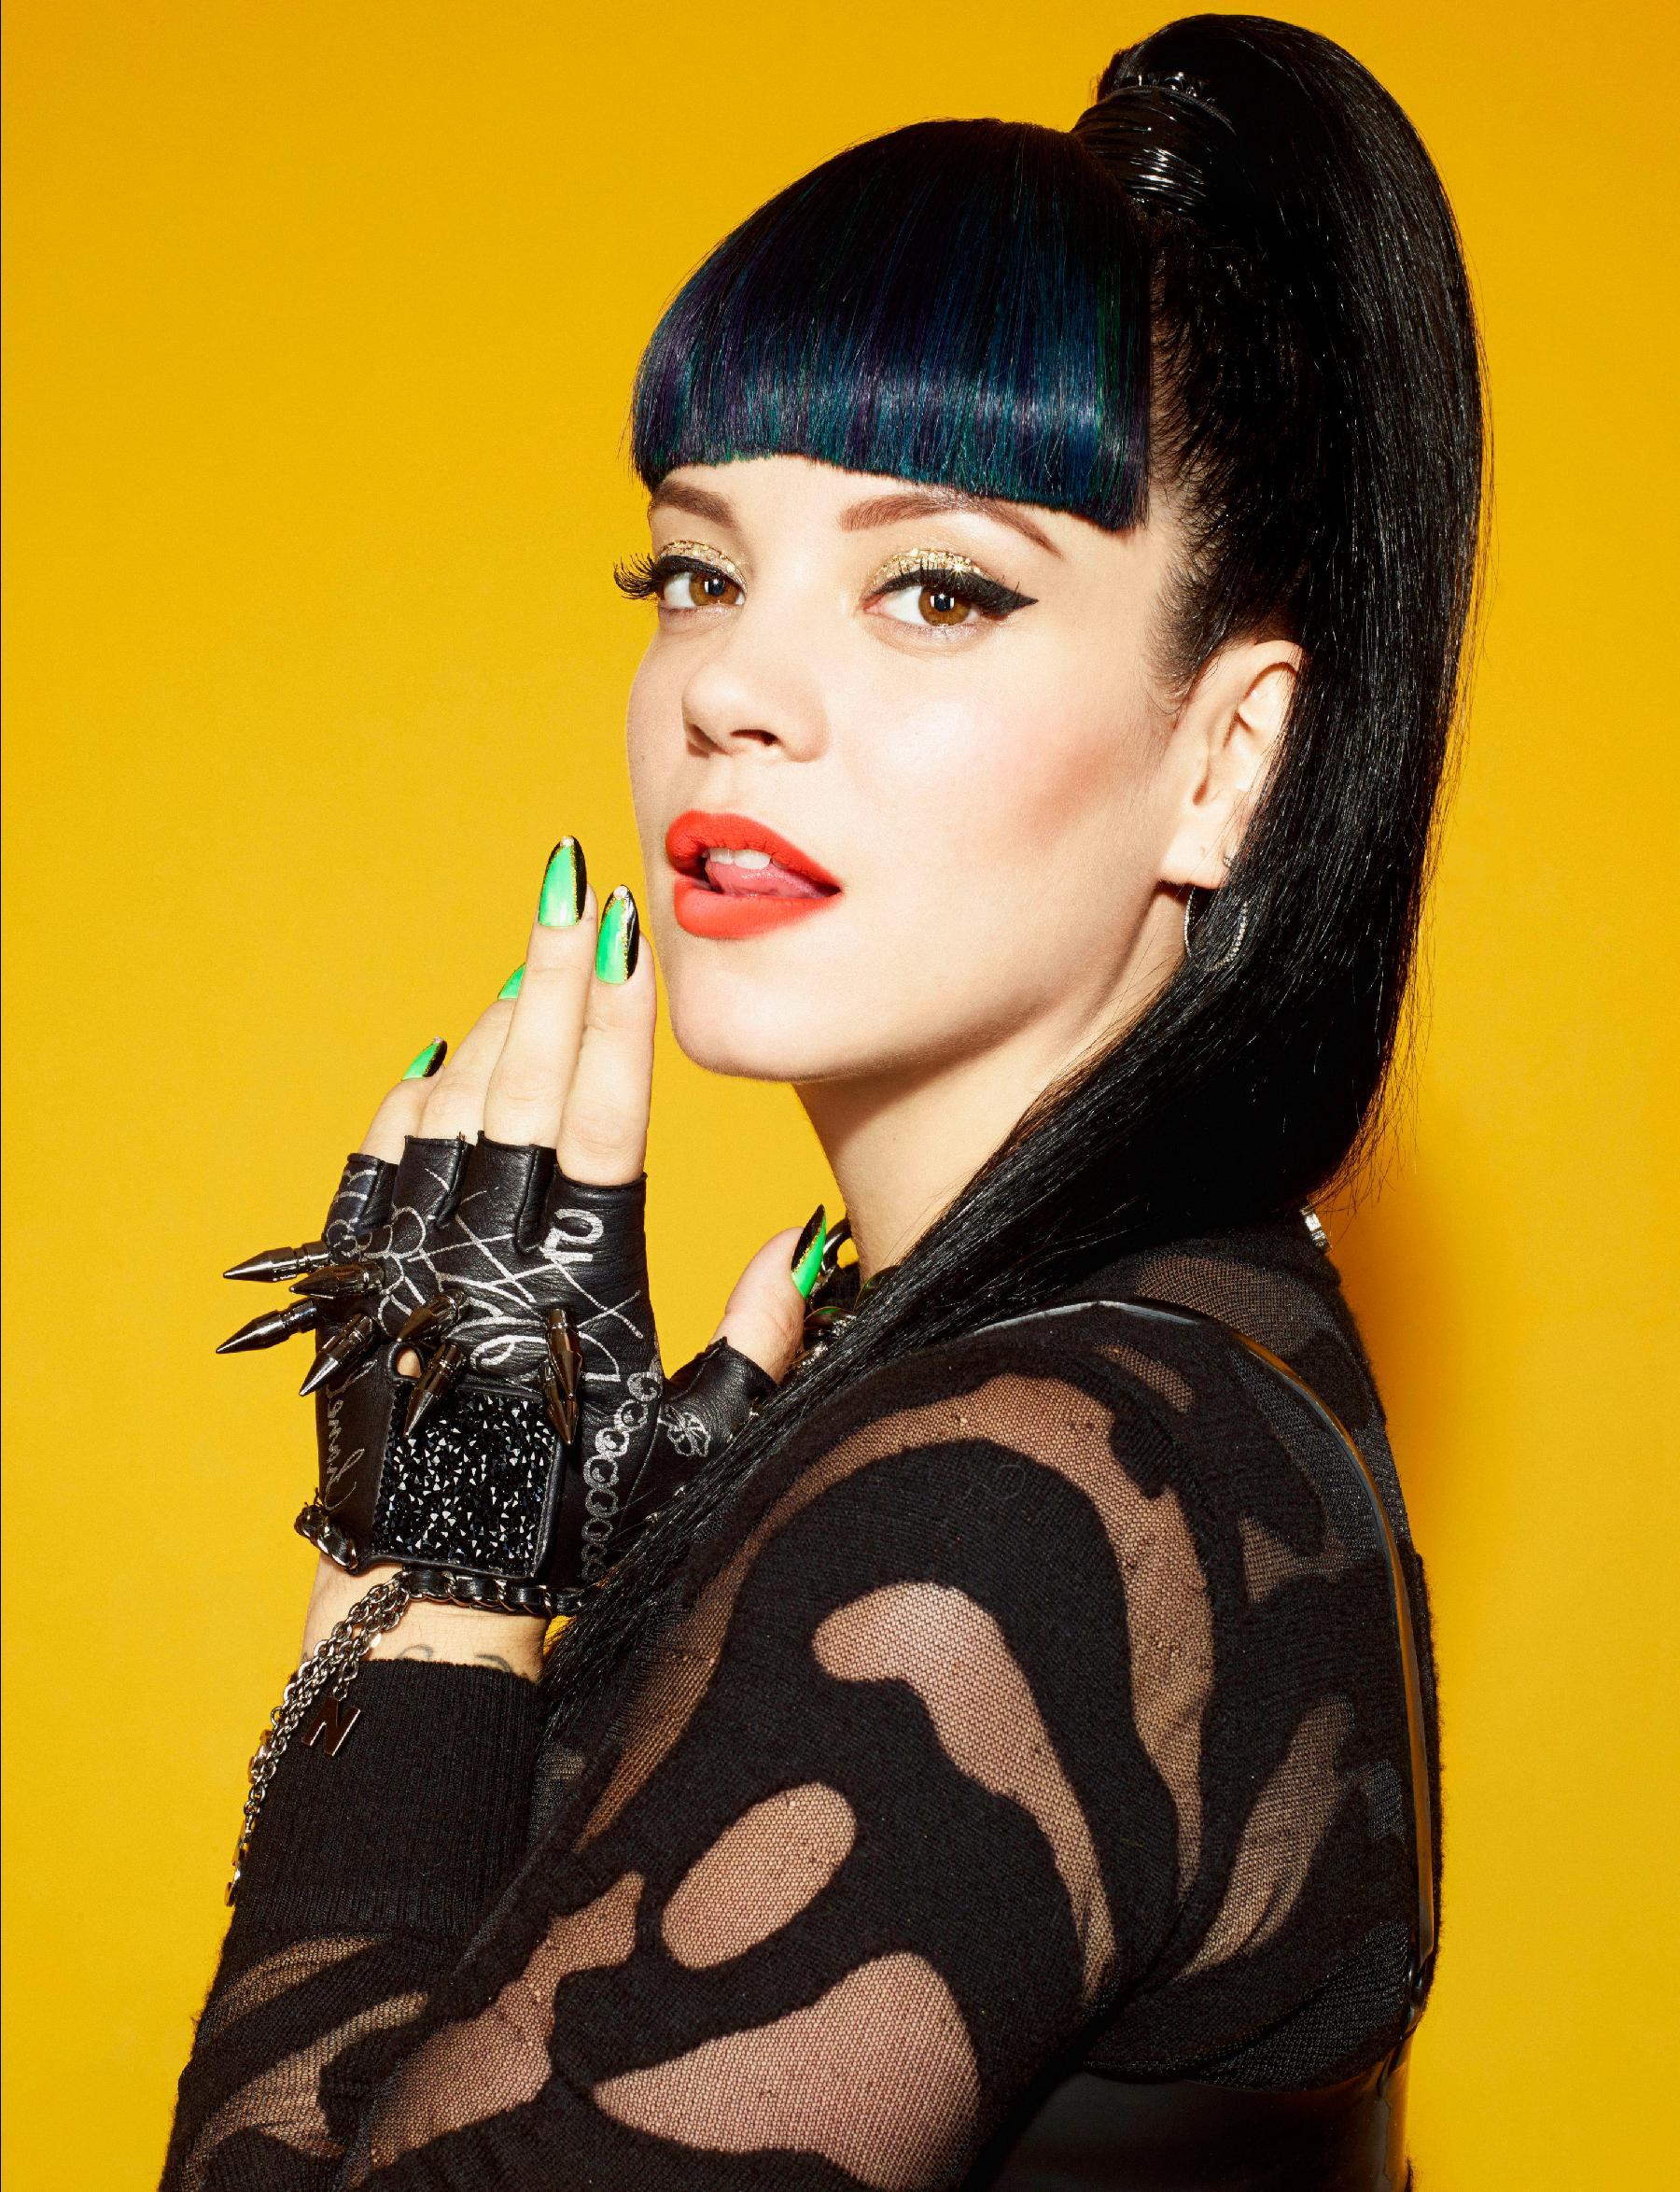 Lily Allen Baby HD Wallpaper, Background Image